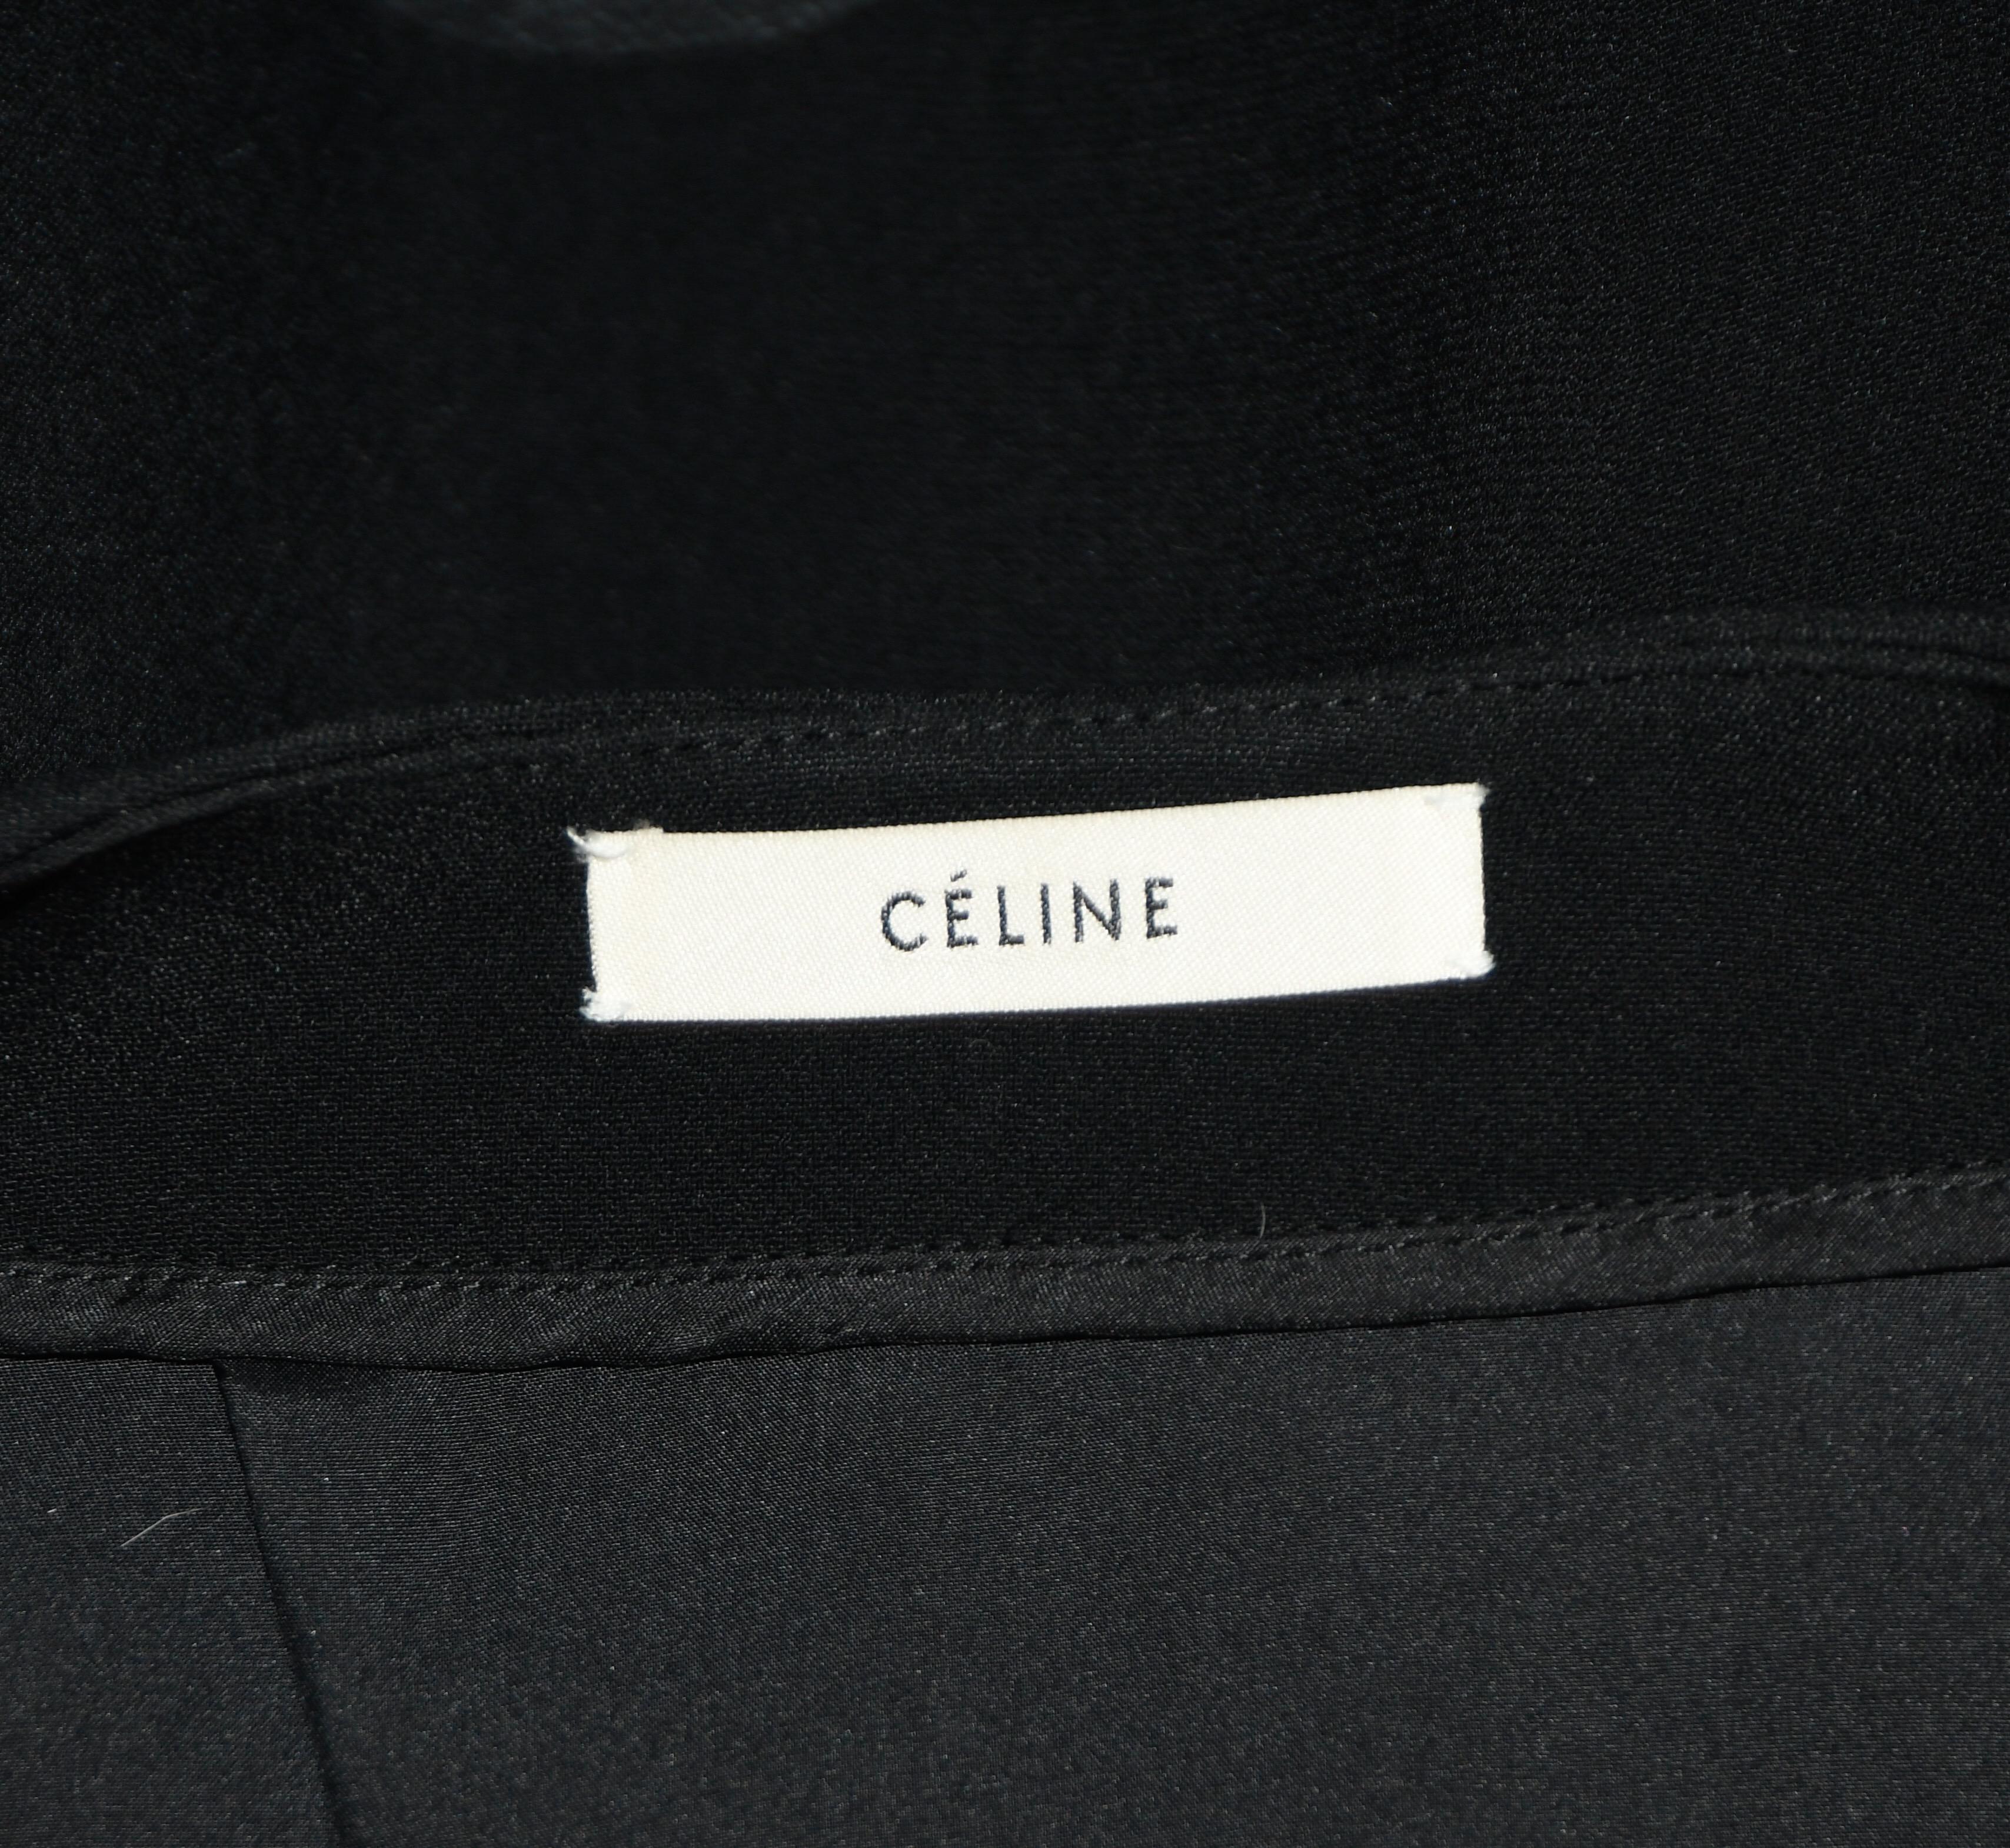 Celine Black V Neck Belted Jacket With Peplum 2012 Spring Paris Collection 40 EU In Excellent Condition For Sale In Palm Beach, FL